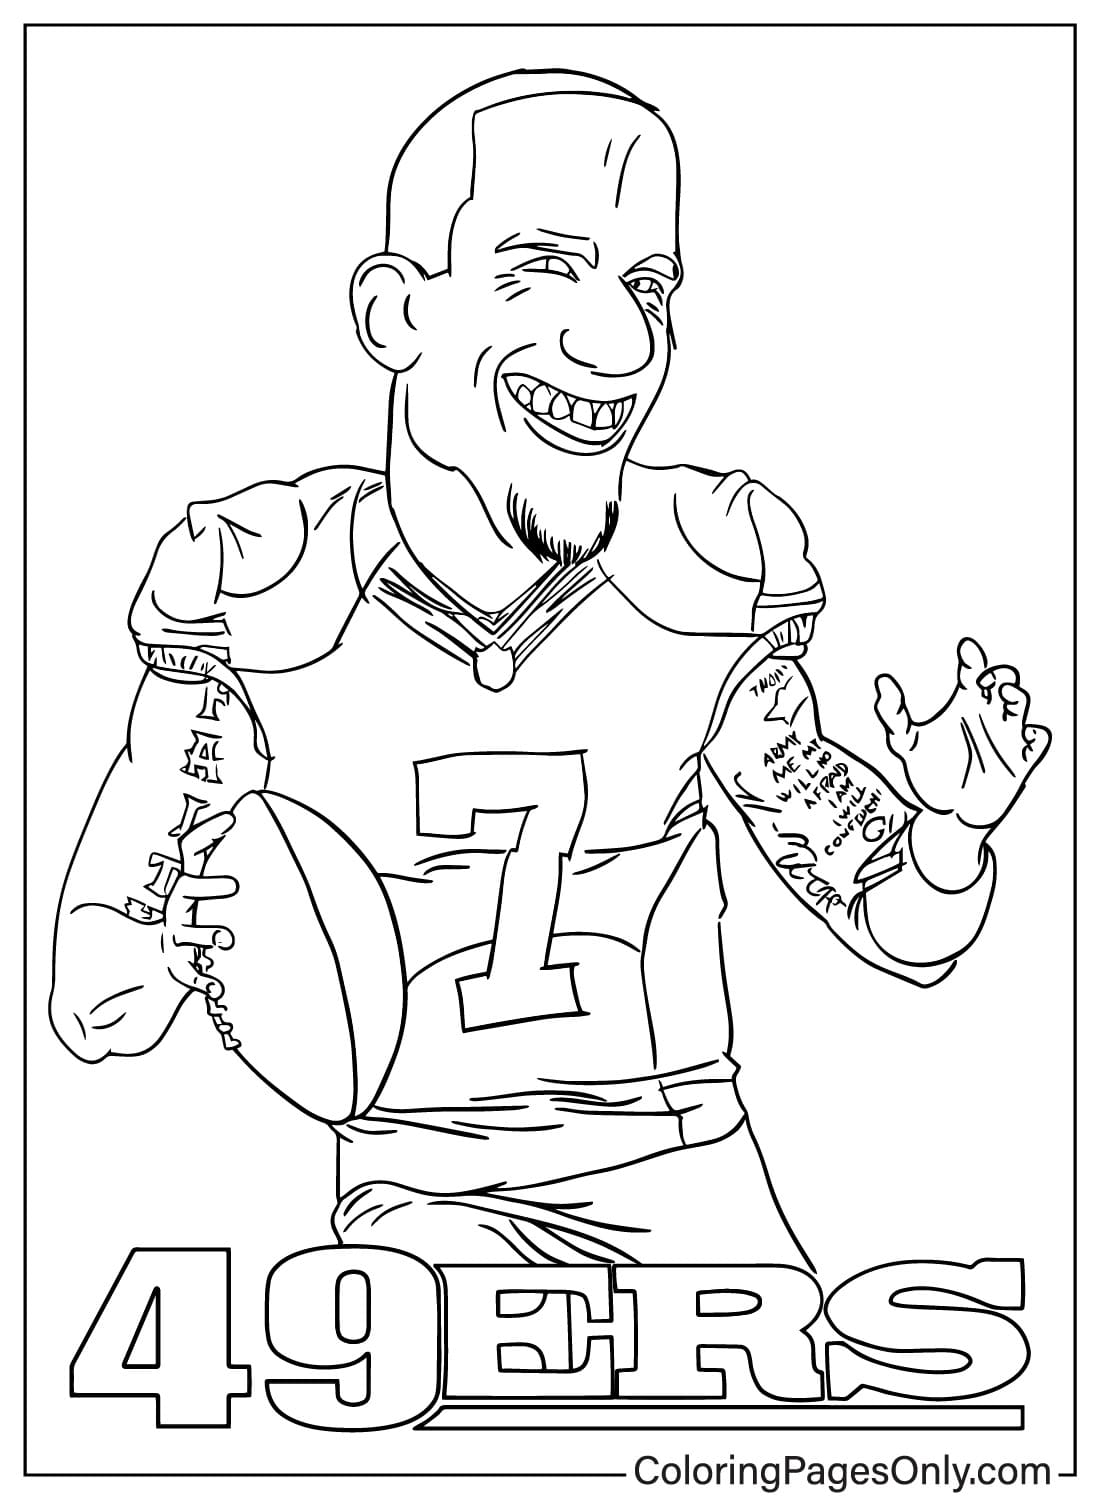 San Francisco 49ers Coloring Page from San Francisco 49ers